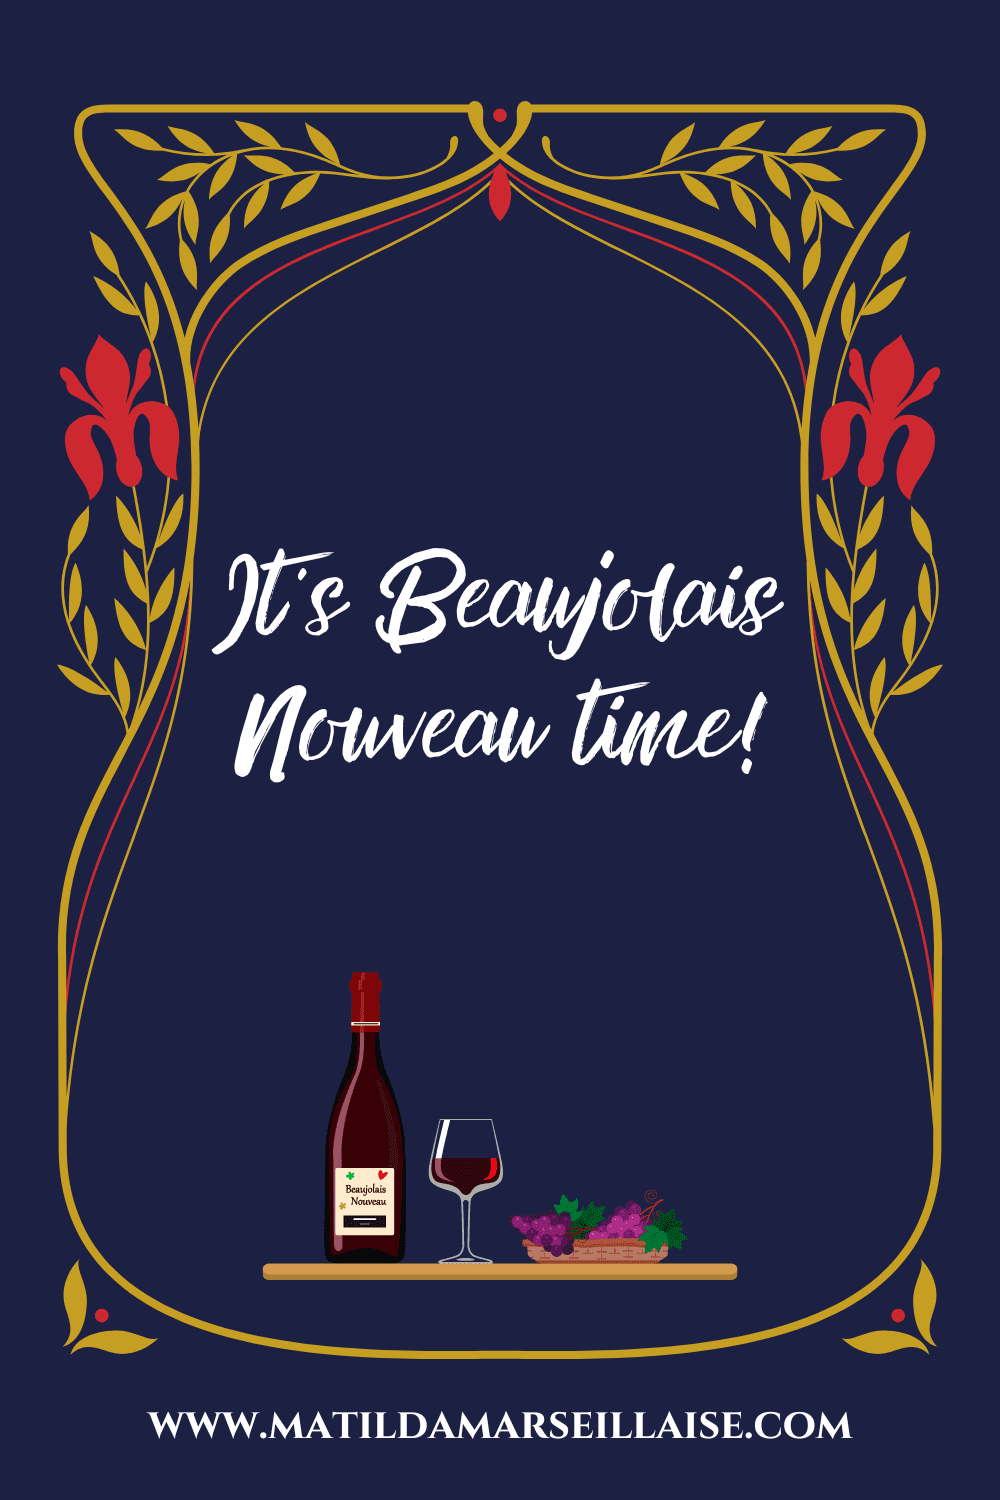 Beaujolais Nouveau 2022: facts and where to taste it